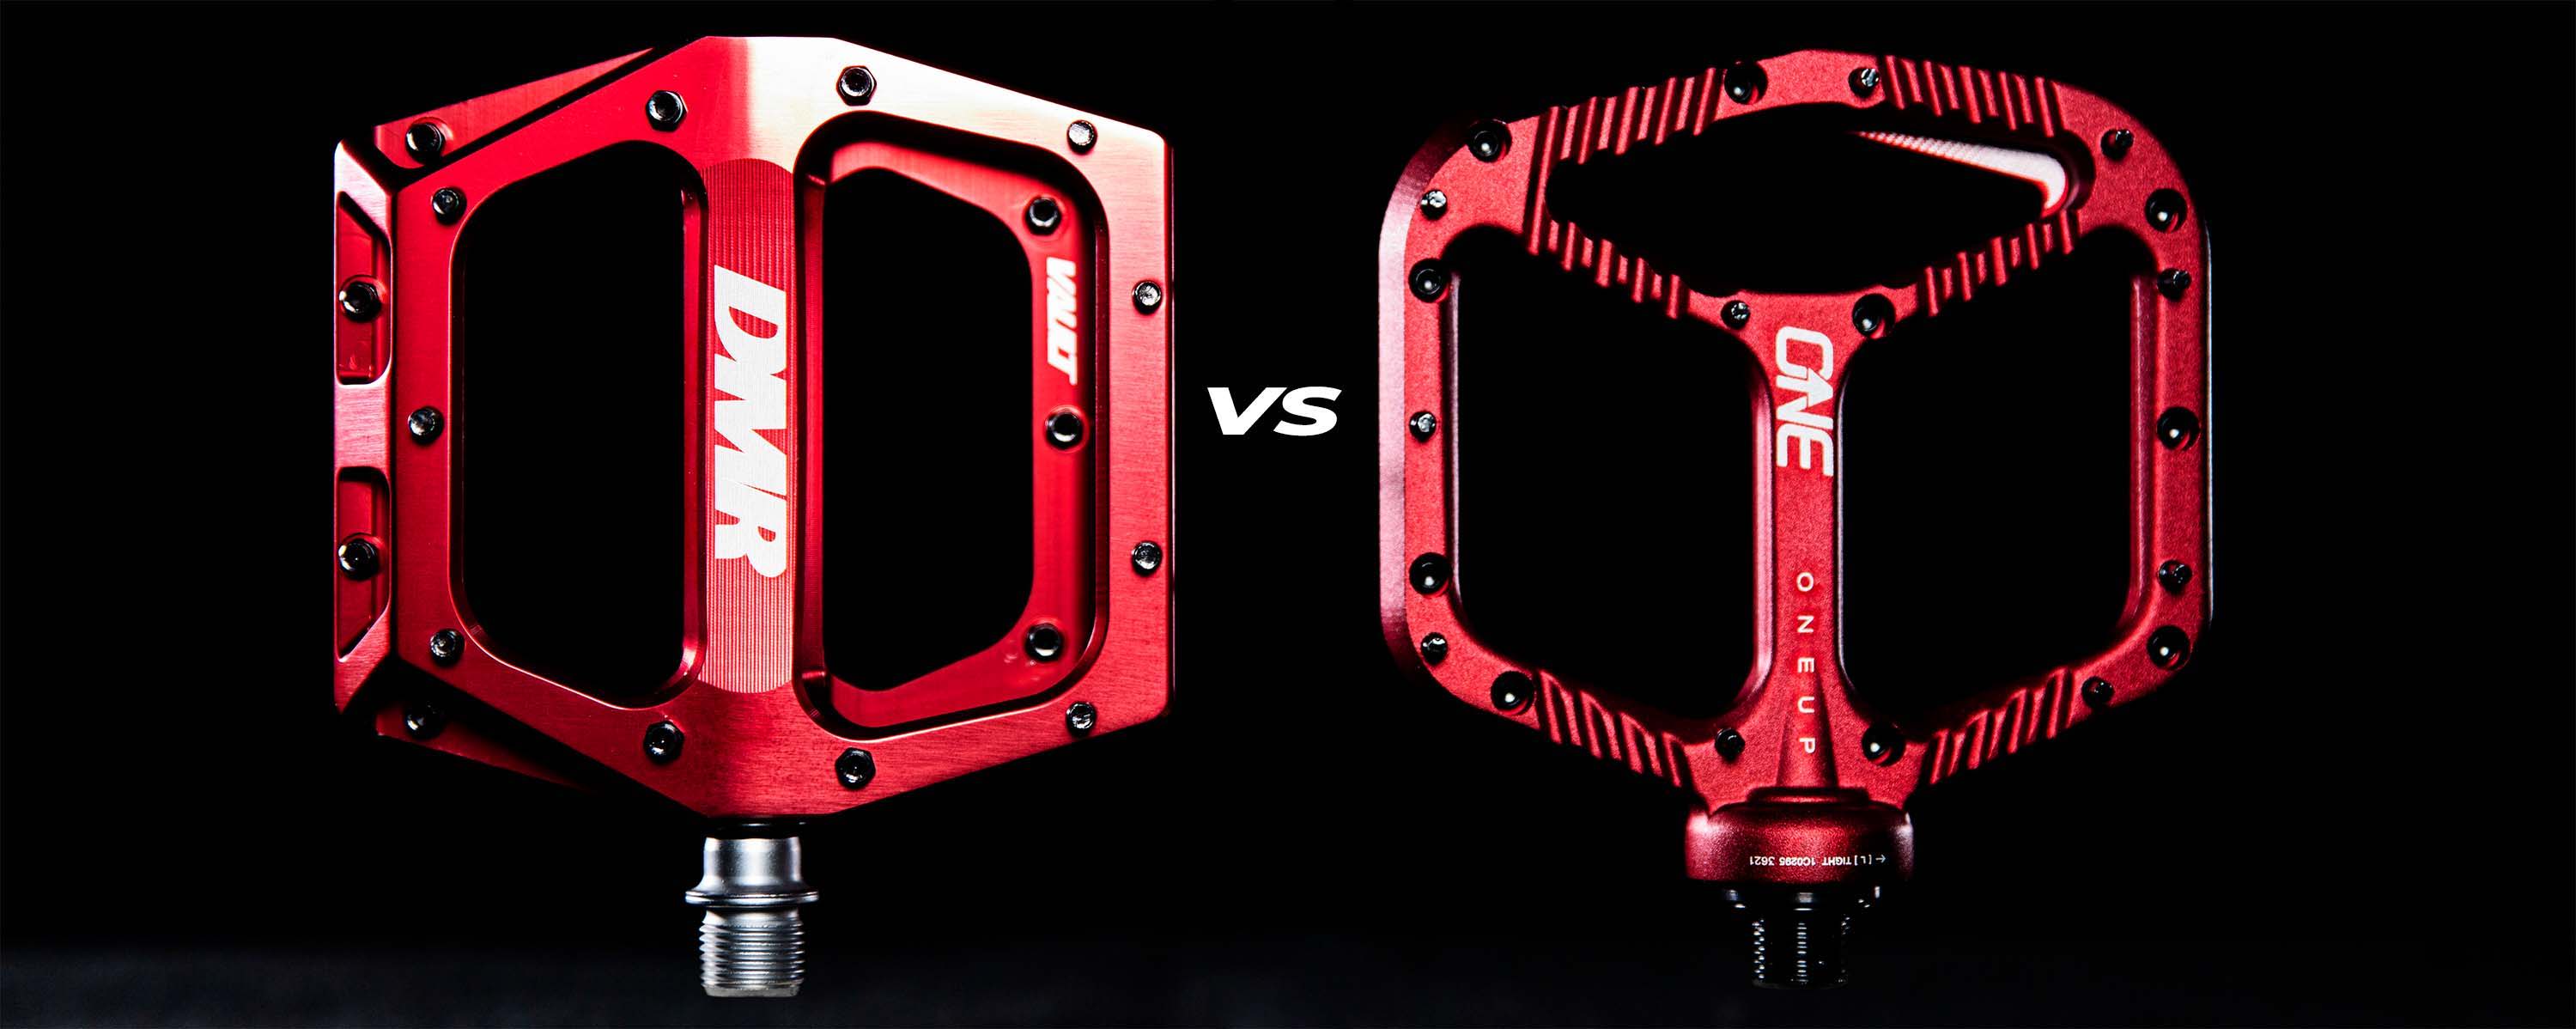 DMR Vault and OneUp Aluminum pedal comparison in red on a black background